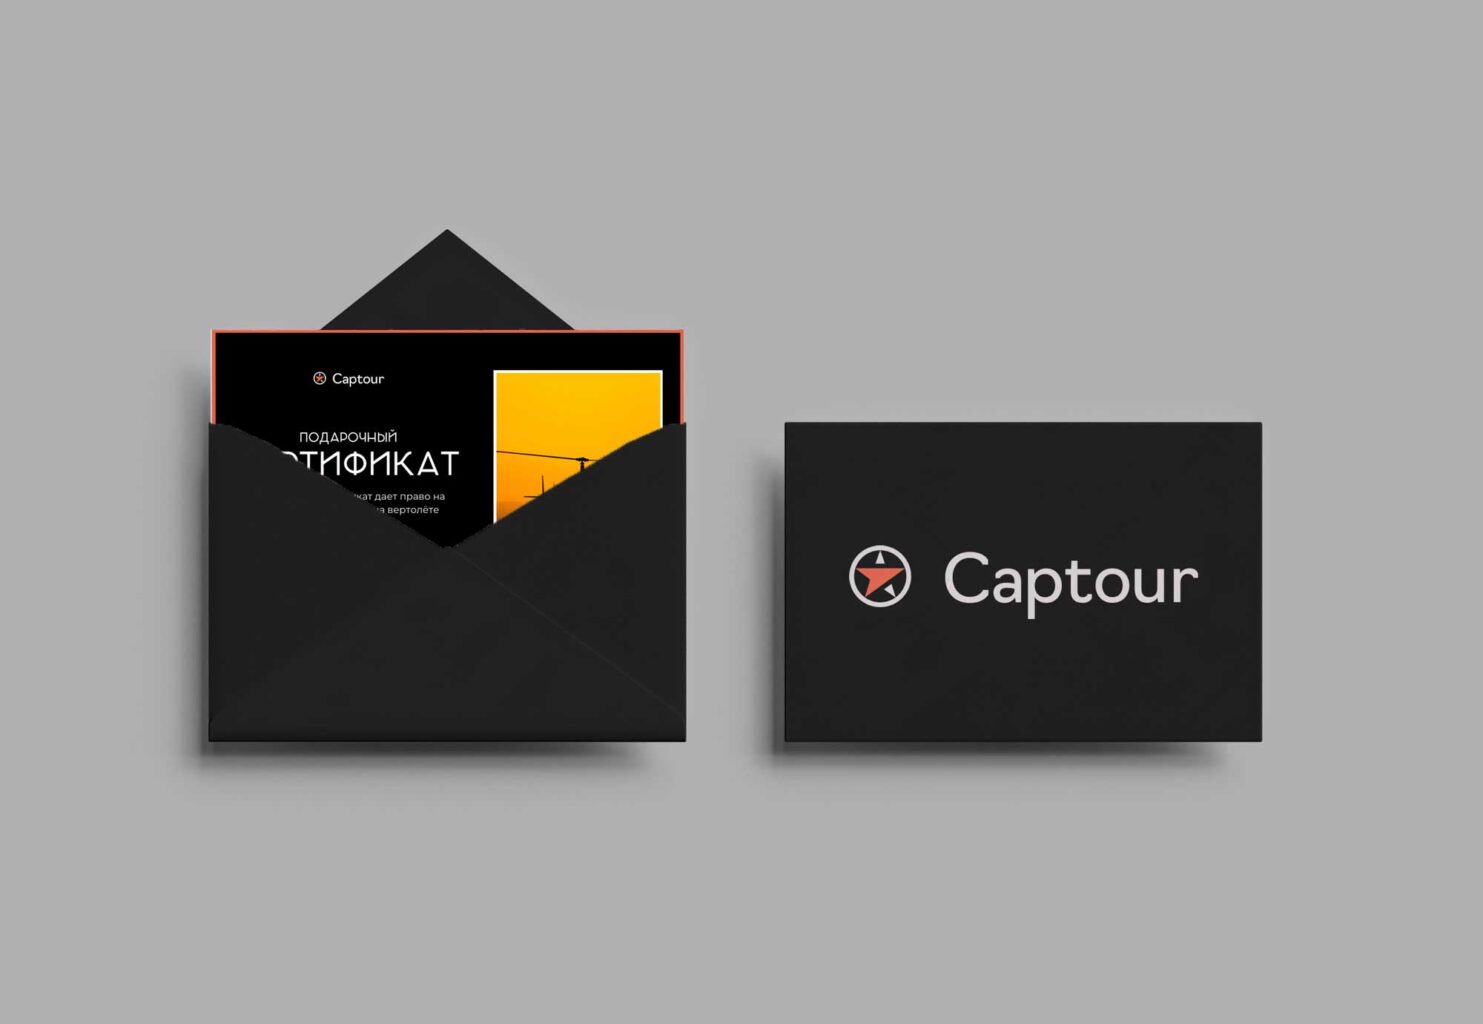 Personal gift certificate from Captour